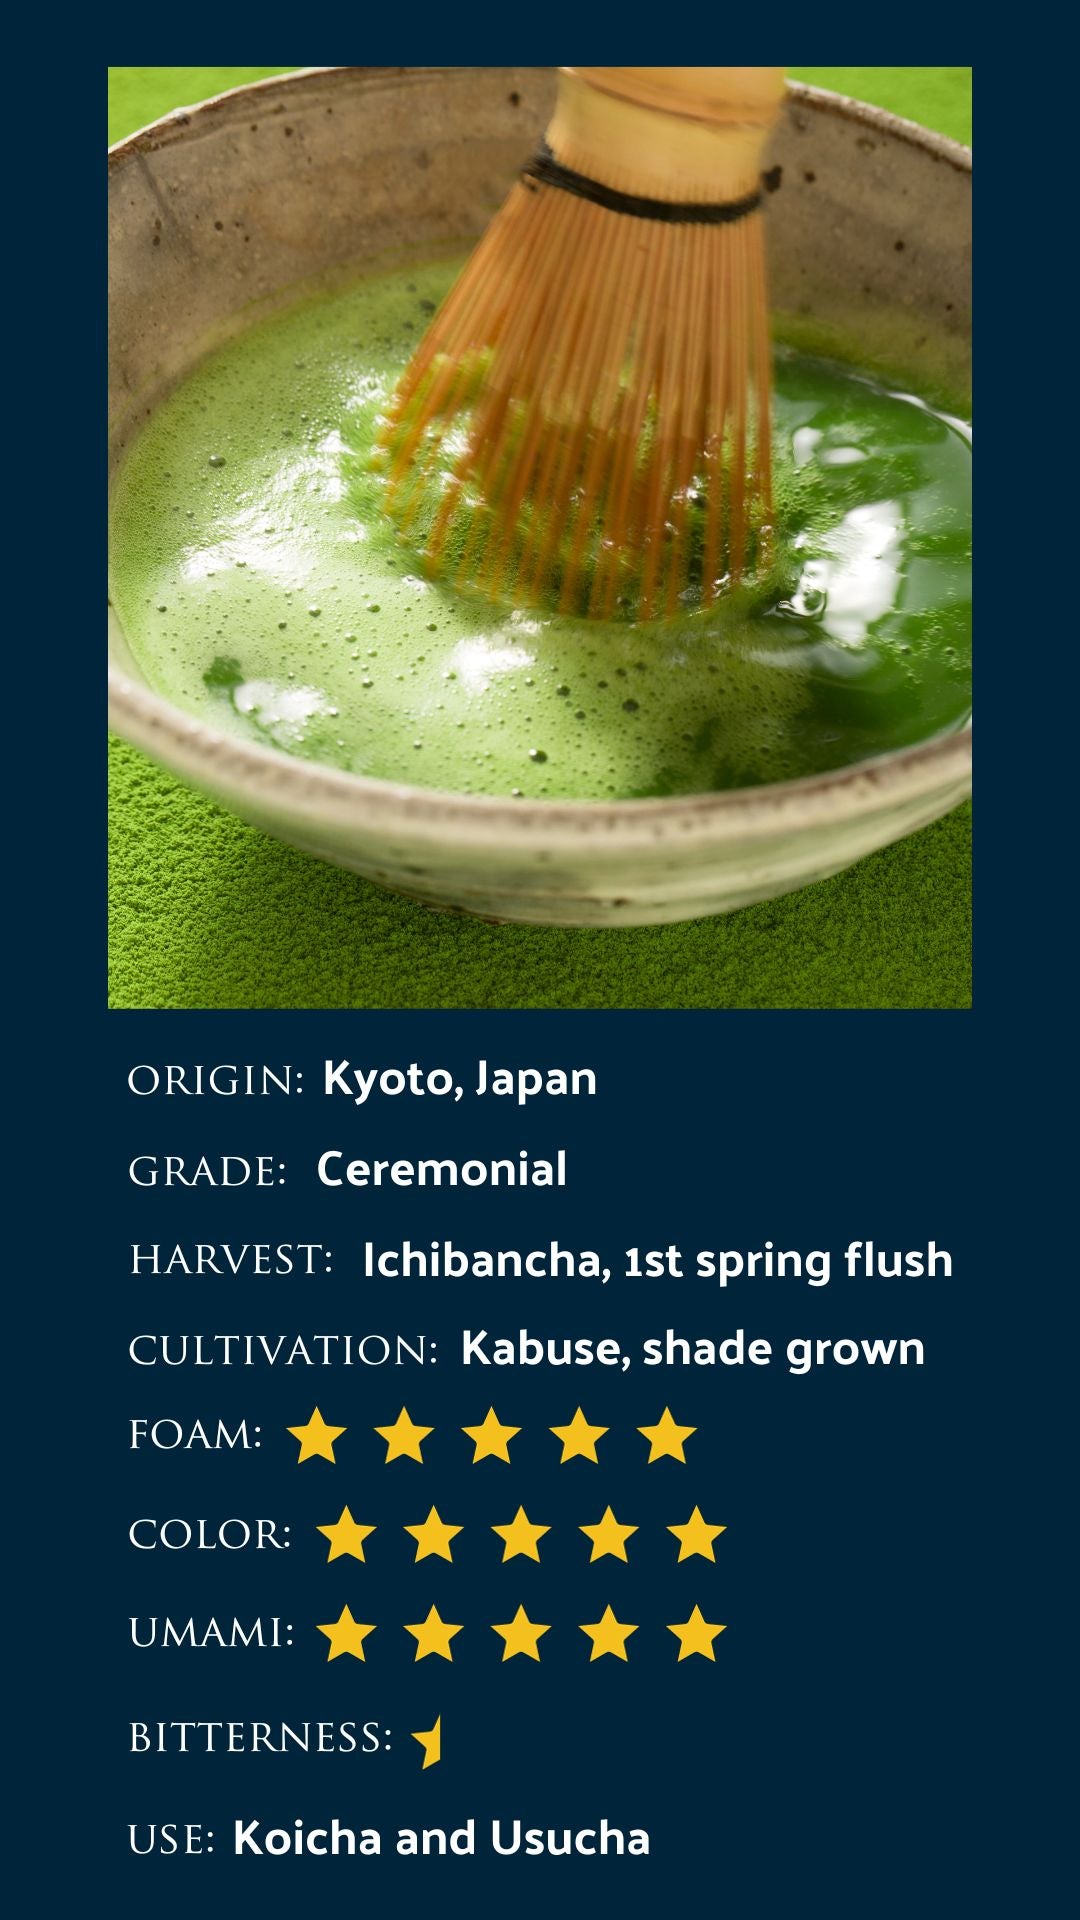 Information chart for ceremonial grade matcha from Kyoto, Japan